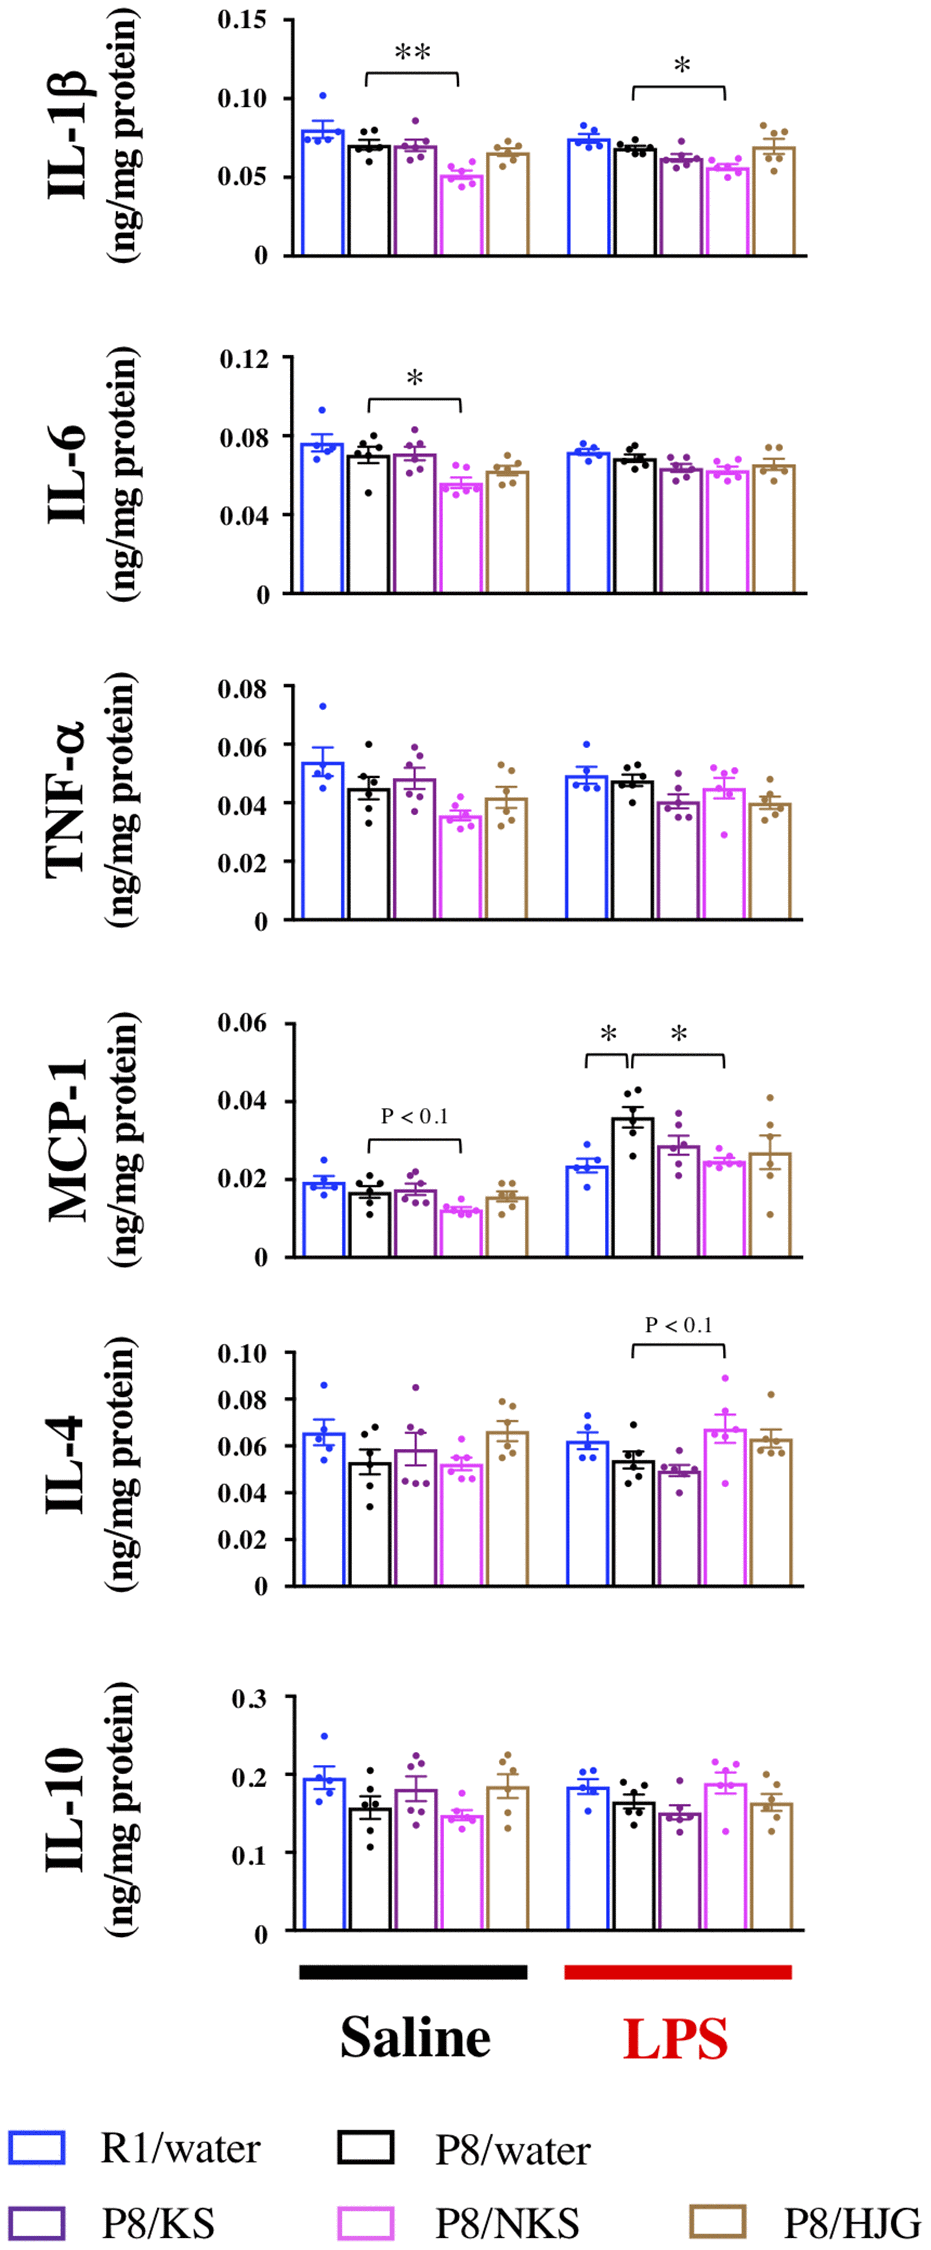 Oral administration of NKS modulates pro- and anti-inflammatory cytokine and chemokine levels in the hippocampus of mice after saline or LPS injection. Data are shown as the mean ± SEM (n = 5 or 6). *P **P 